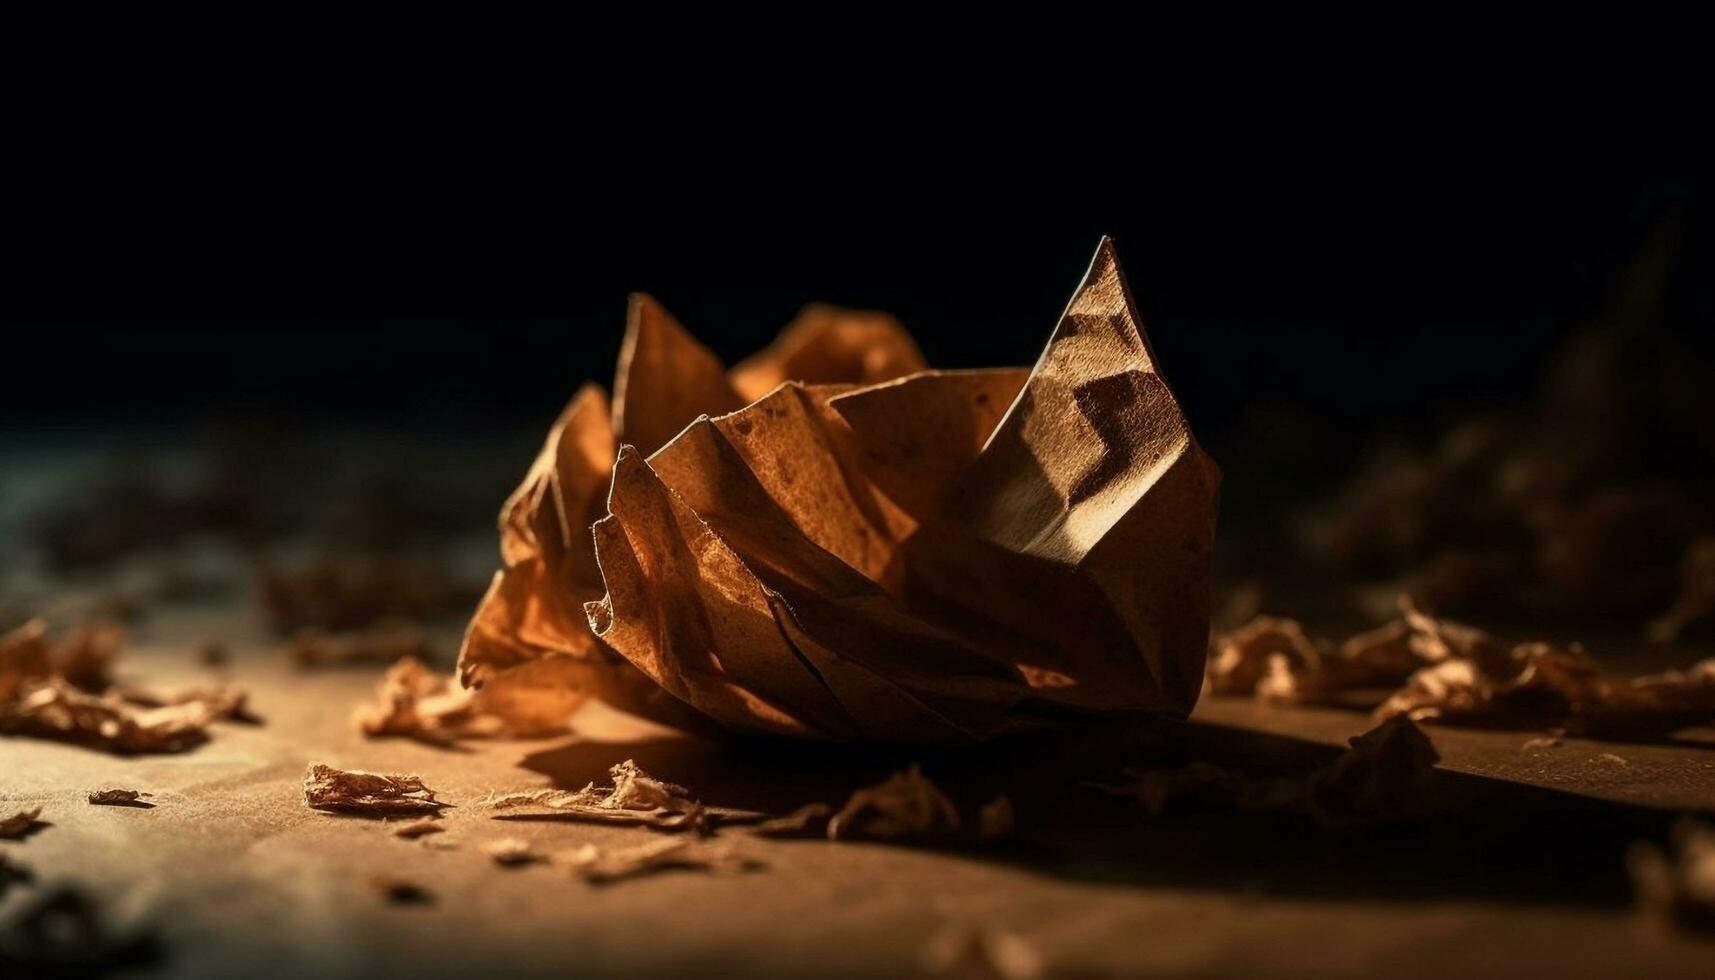 Golden ship sails on crumpled chocolate sea, a luxurious dessert generated by AI photo